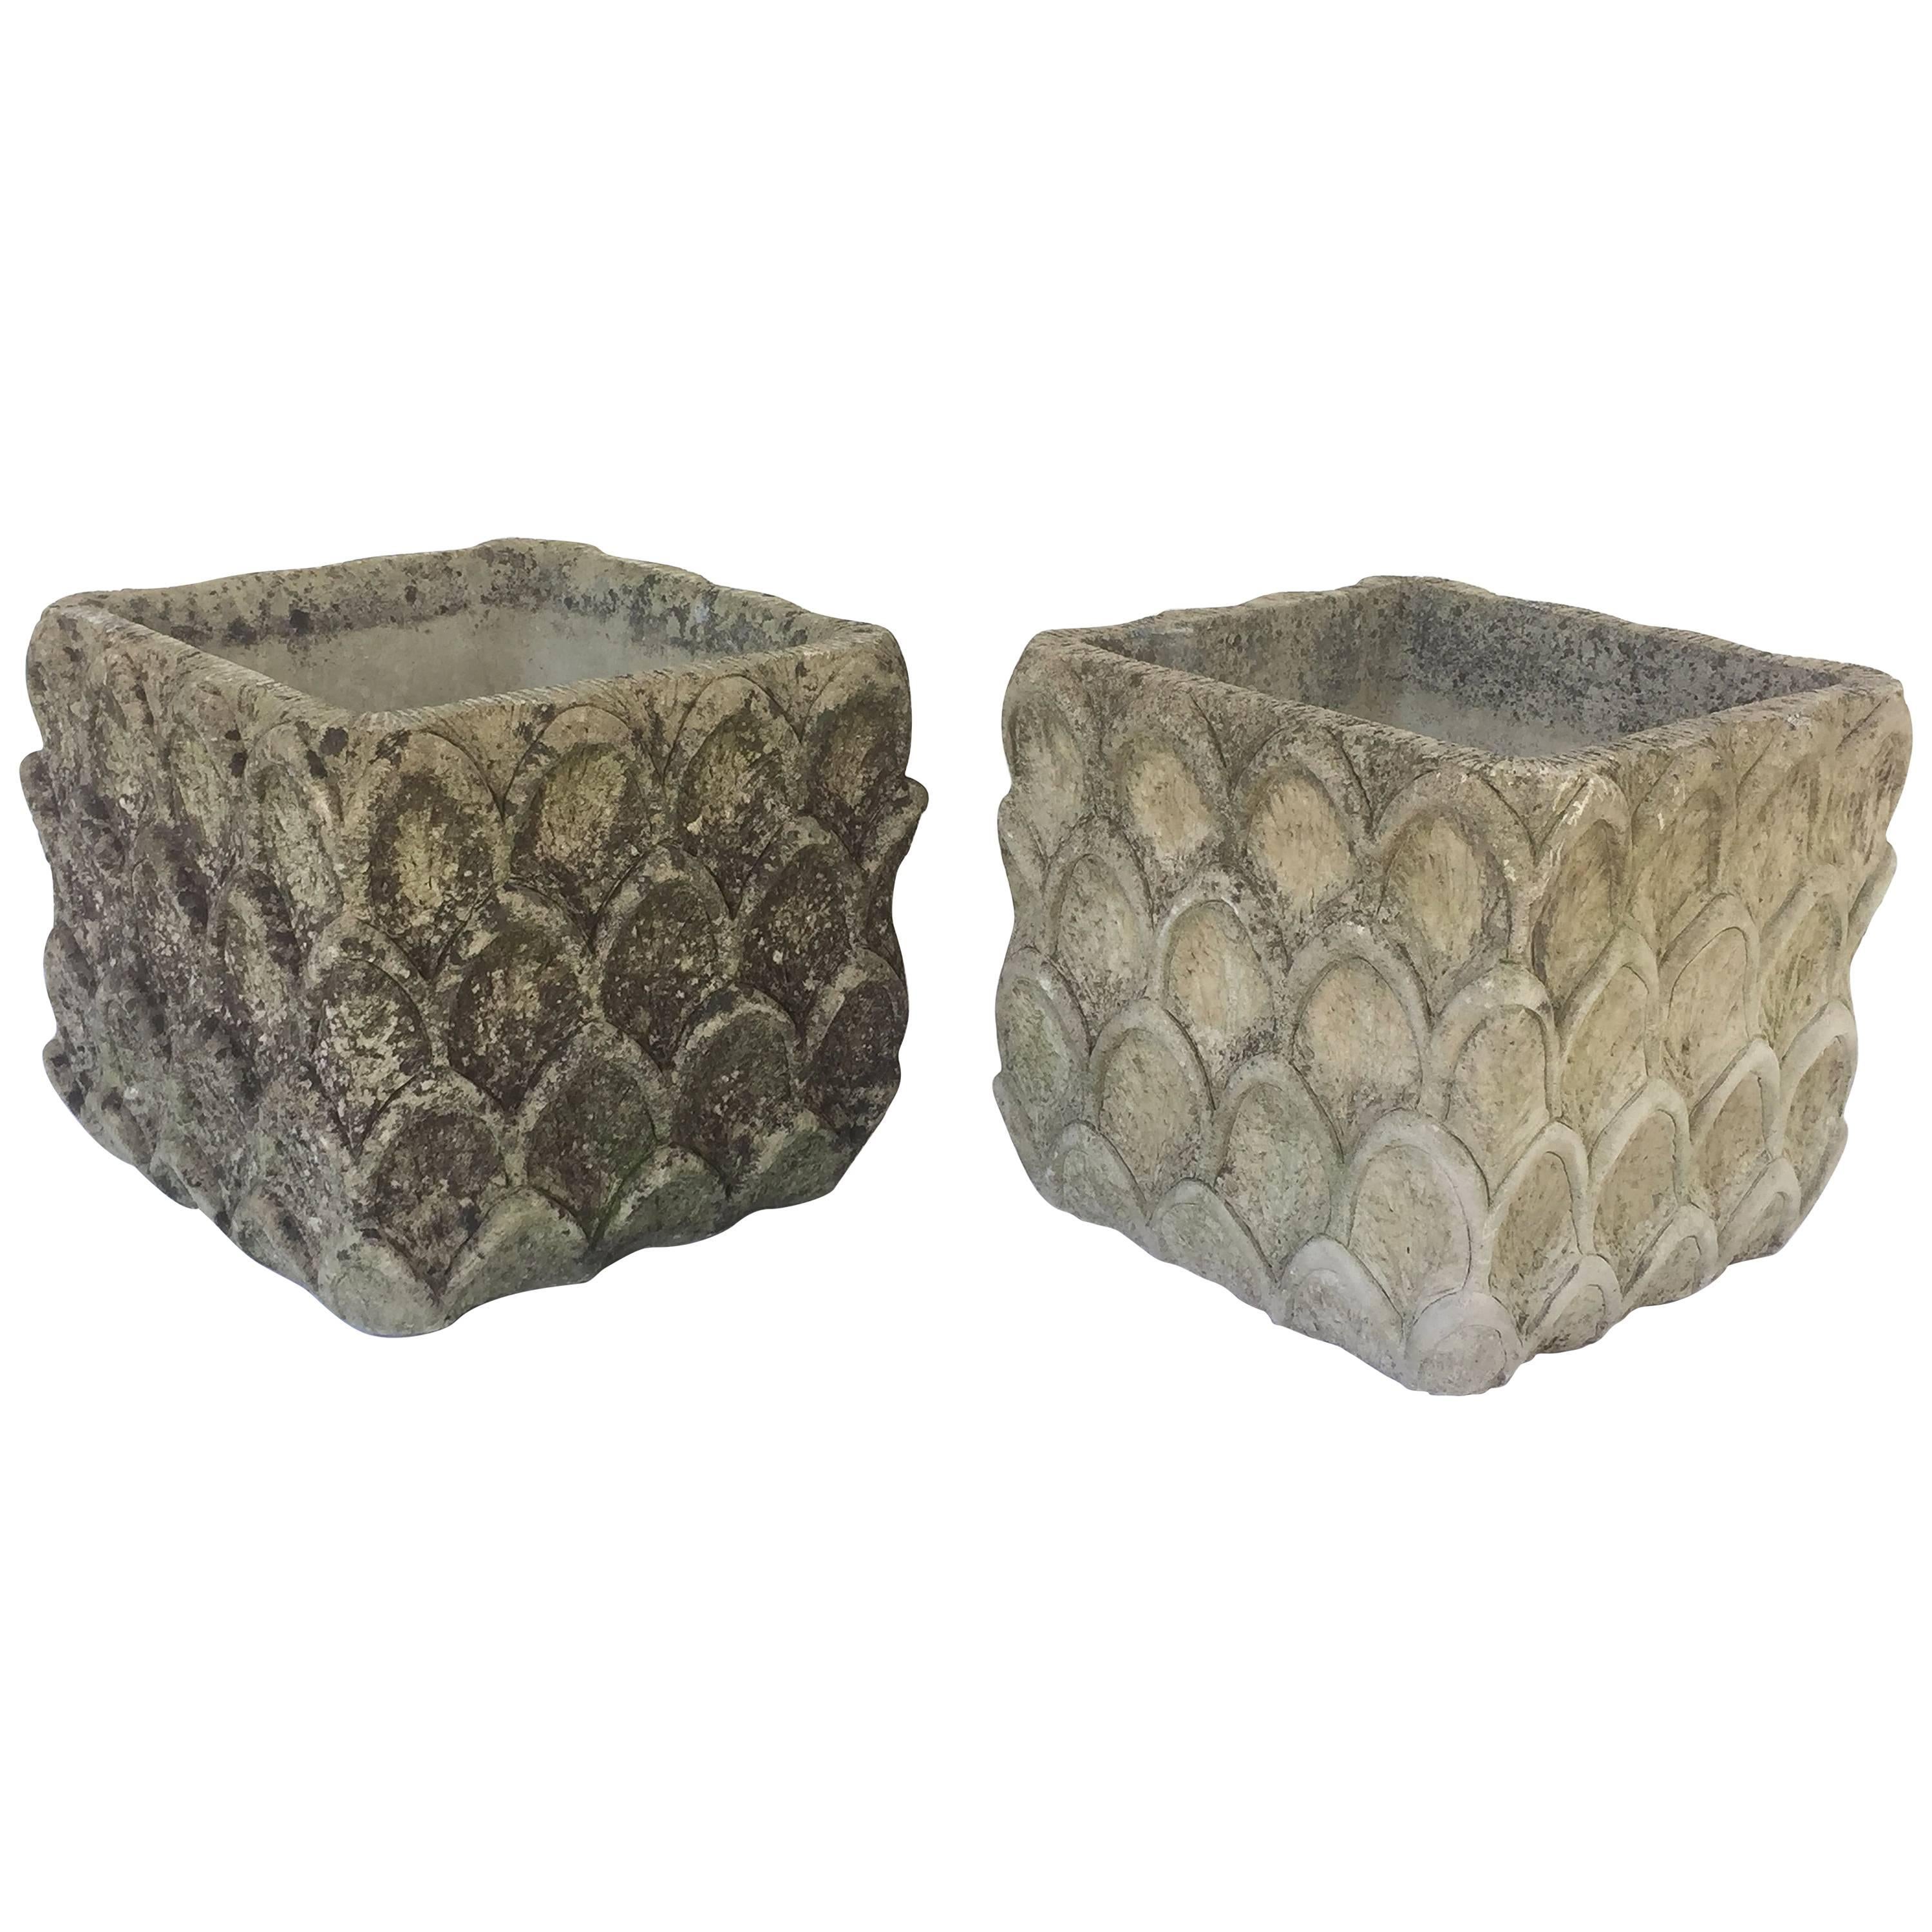 Pair of Cotswolds Garden Stone Planters from England